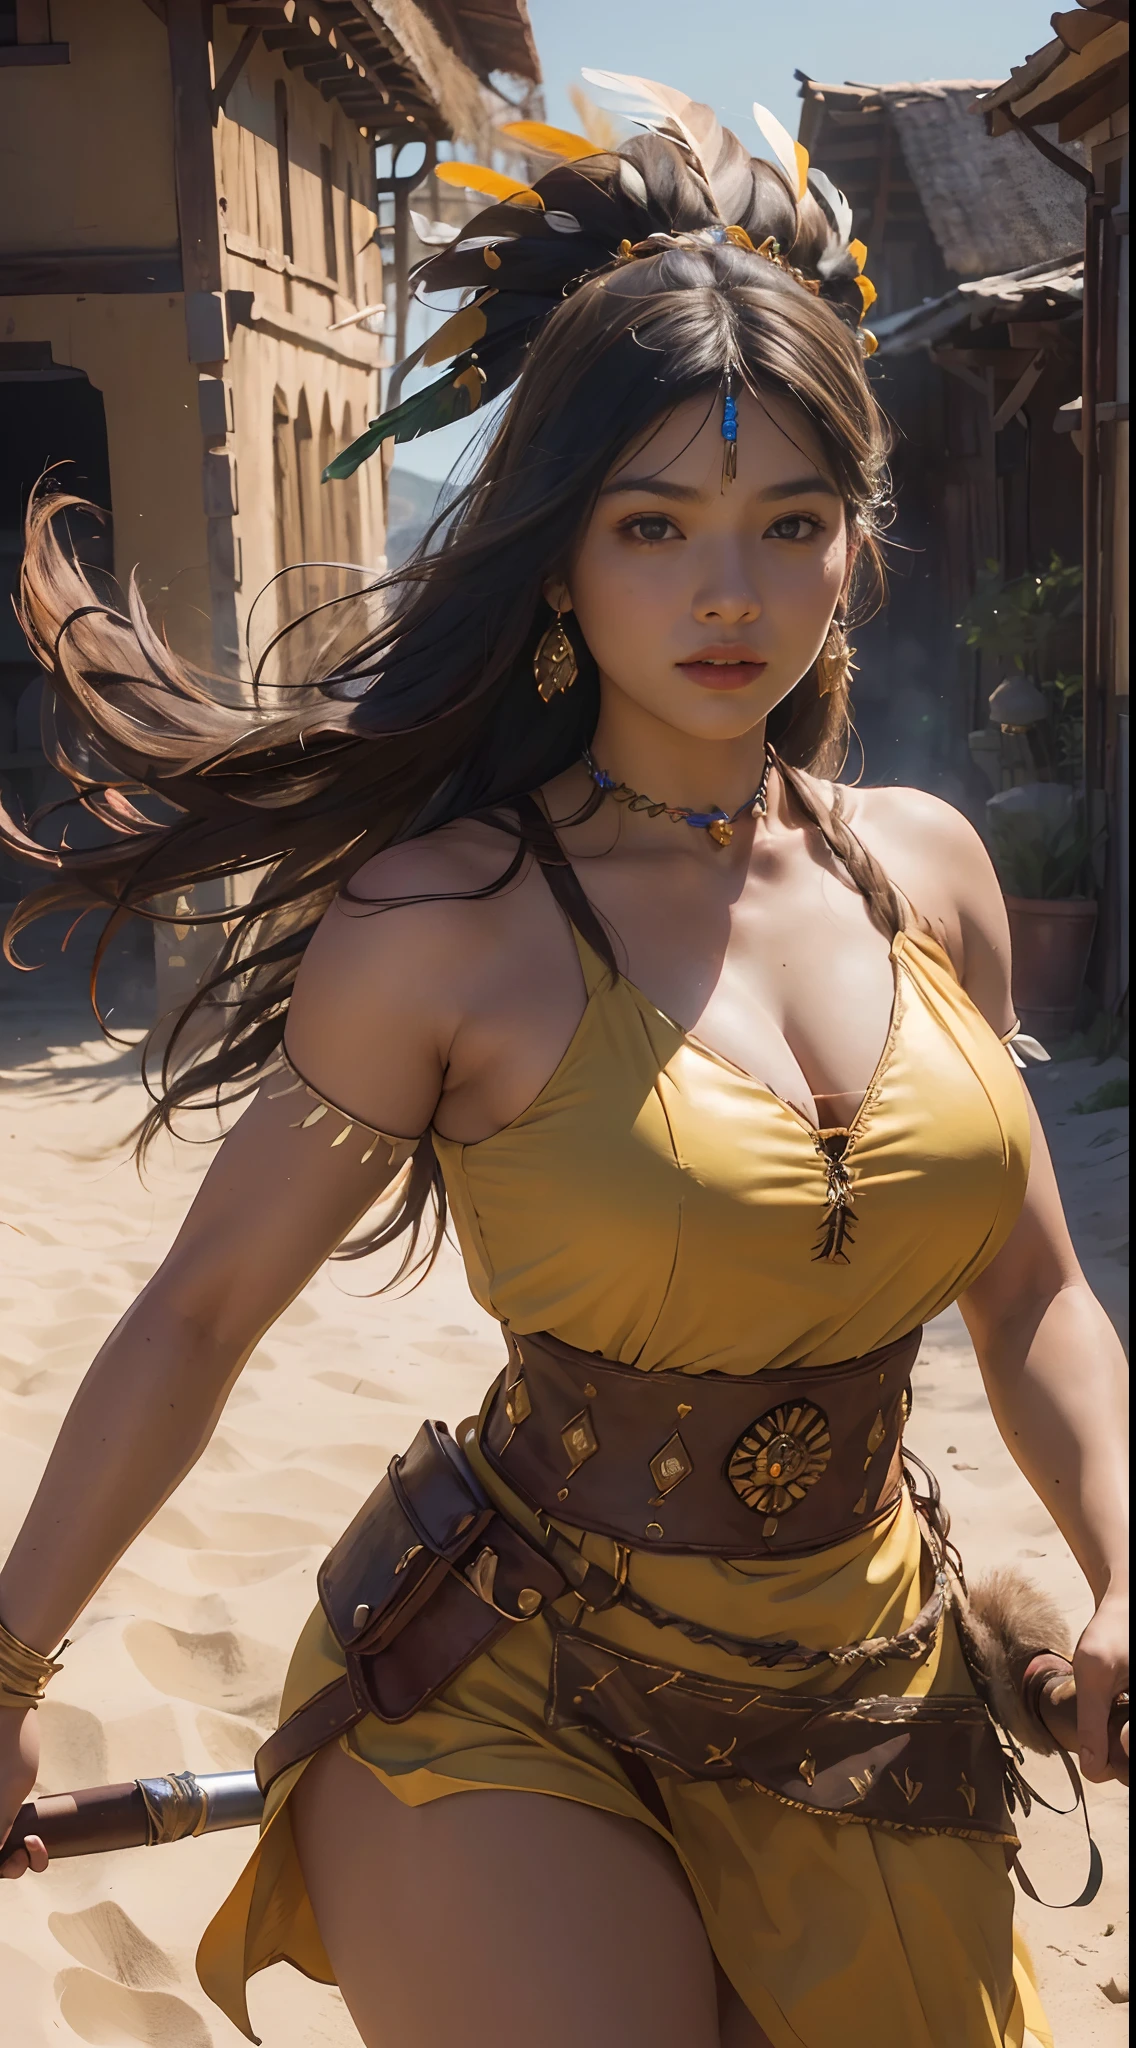 ((masterpiece)), ((best quality)), ((highres)), extremely detailed)), ((1 girl as Pocahontas)), full body,  Native American woman, young beautiful woman, Big breast, (super realistic), (peerless beauty), detailed skin texture, detailed cloth texture, beautiful detailed face, intricate details, ultra detailed, indigenes feather jewelry, feather headdress, ((traditional yellow handmade dress)) ((armed female hunter warrior)), dynamic pose, on desert, riding a horse, aiming the spear, ultra realistic, concept art, elegant, ((intricate)), ((highly detailed)), depth of field, ((professionally color graded)), soft ambient lighting, dusk, (Best quality, A high resolution, Photorealistic, primitive, 8K,Masterpiece, ),Best quality, Masterpiec8K.hdr. High ribs:1.2, filmgrain, Blur bokeh:1.2, Lens flare, (vivd colour:1.2), (Delicate),